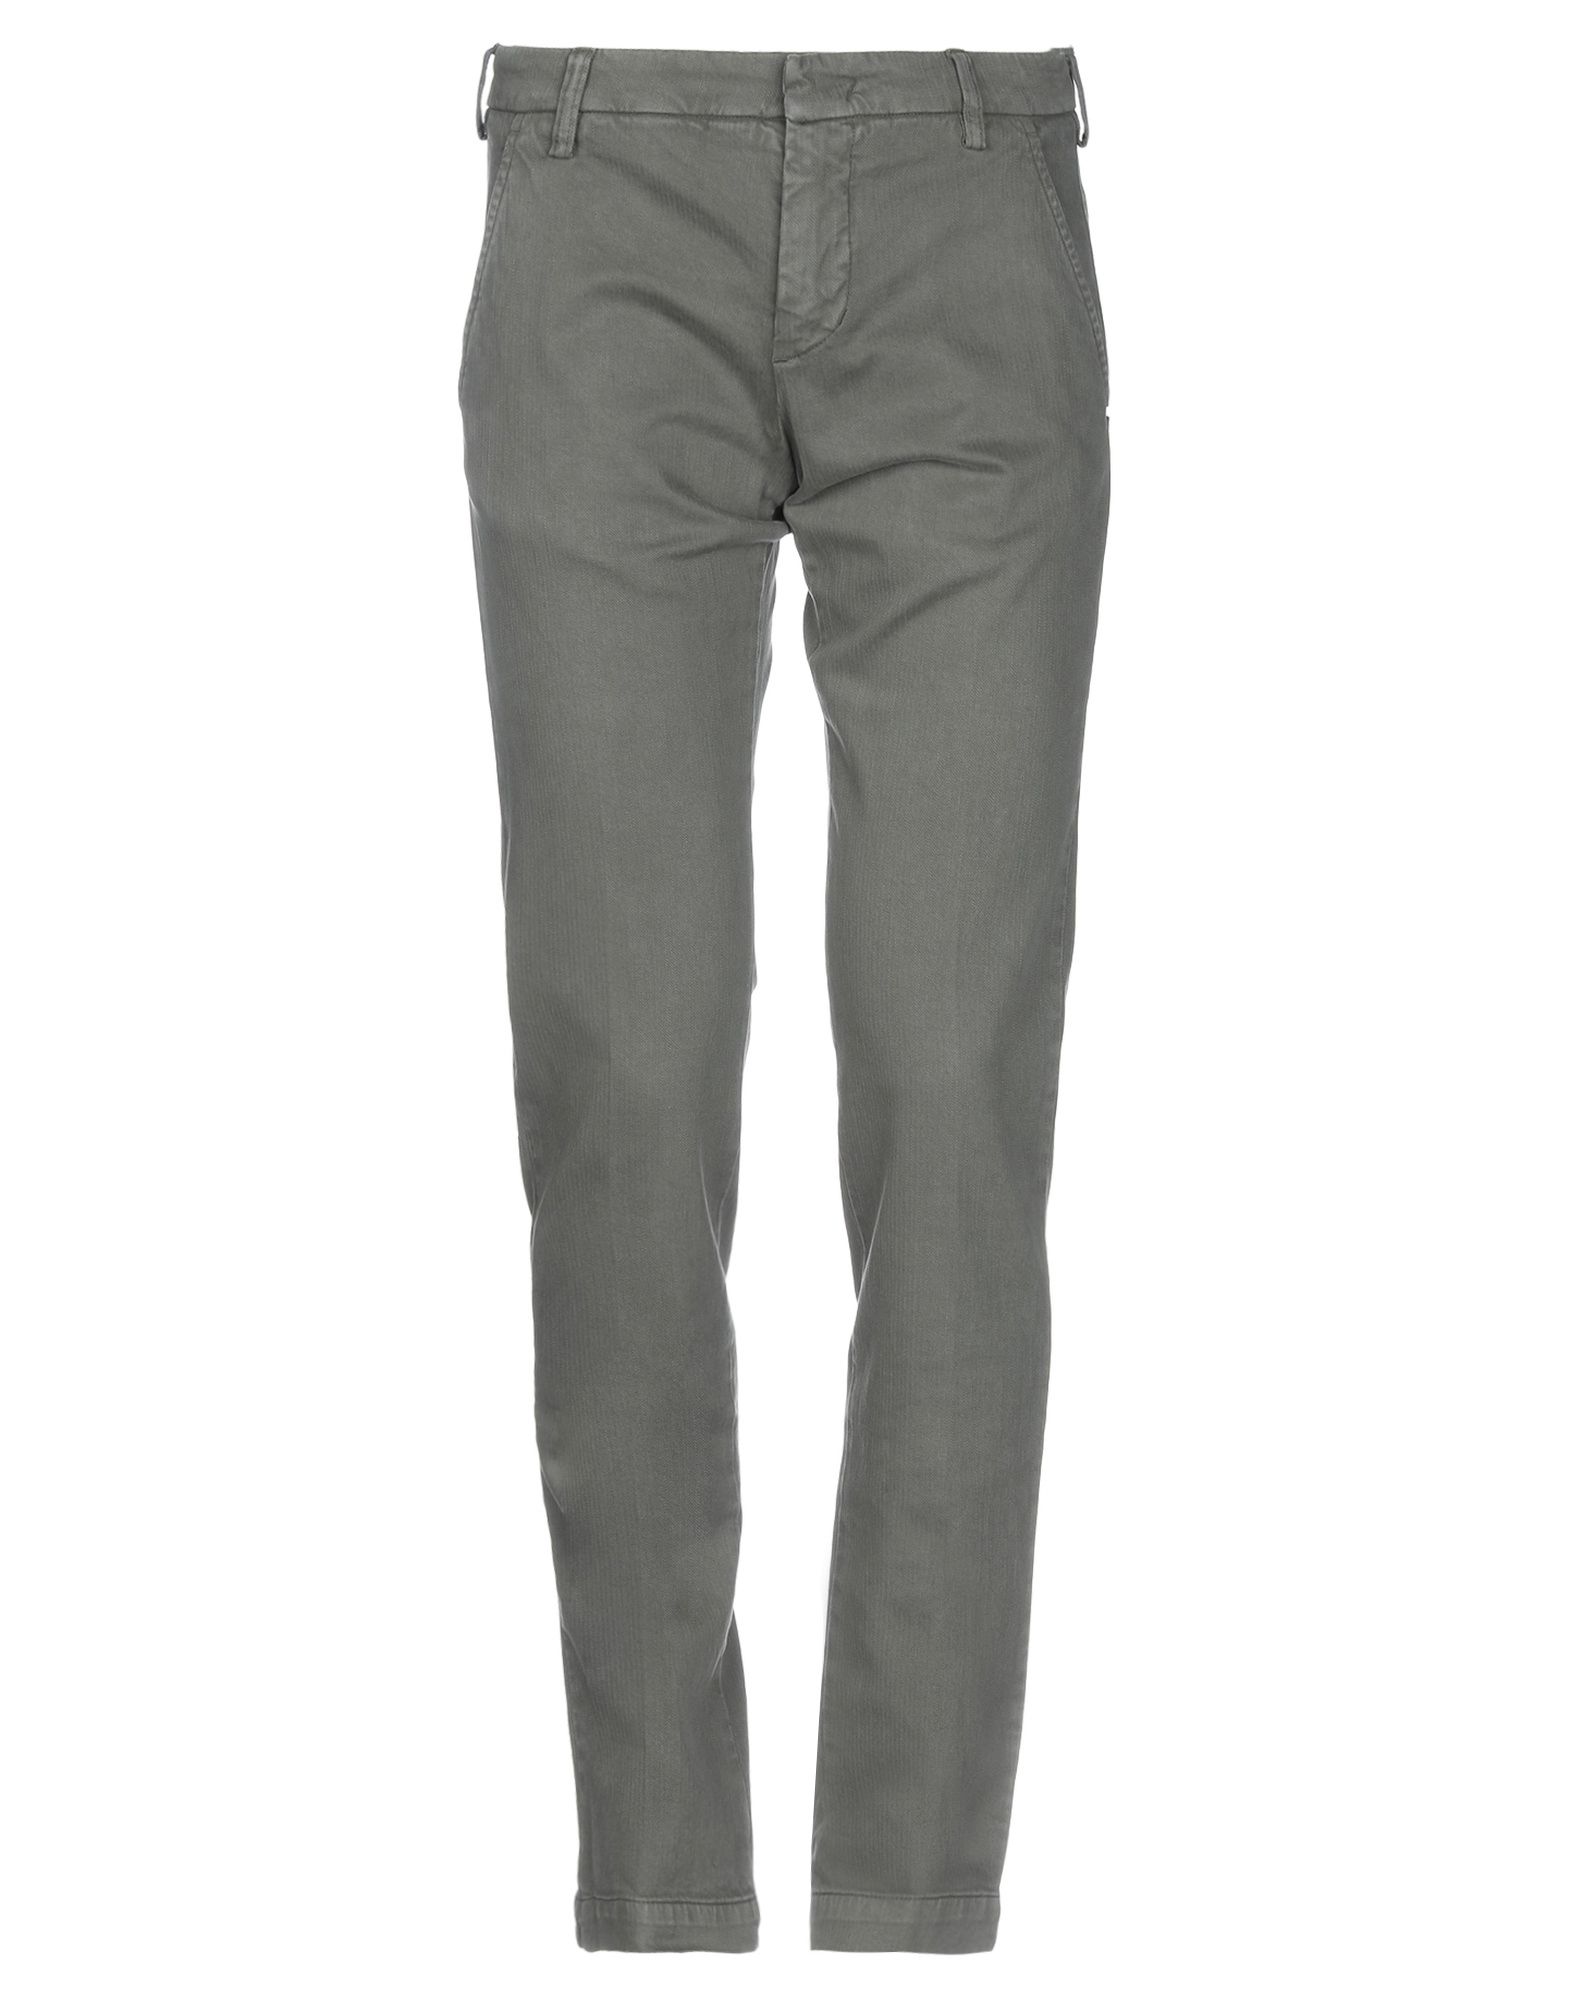 Entre Amis Casual Pants In Military Green | ModeSens